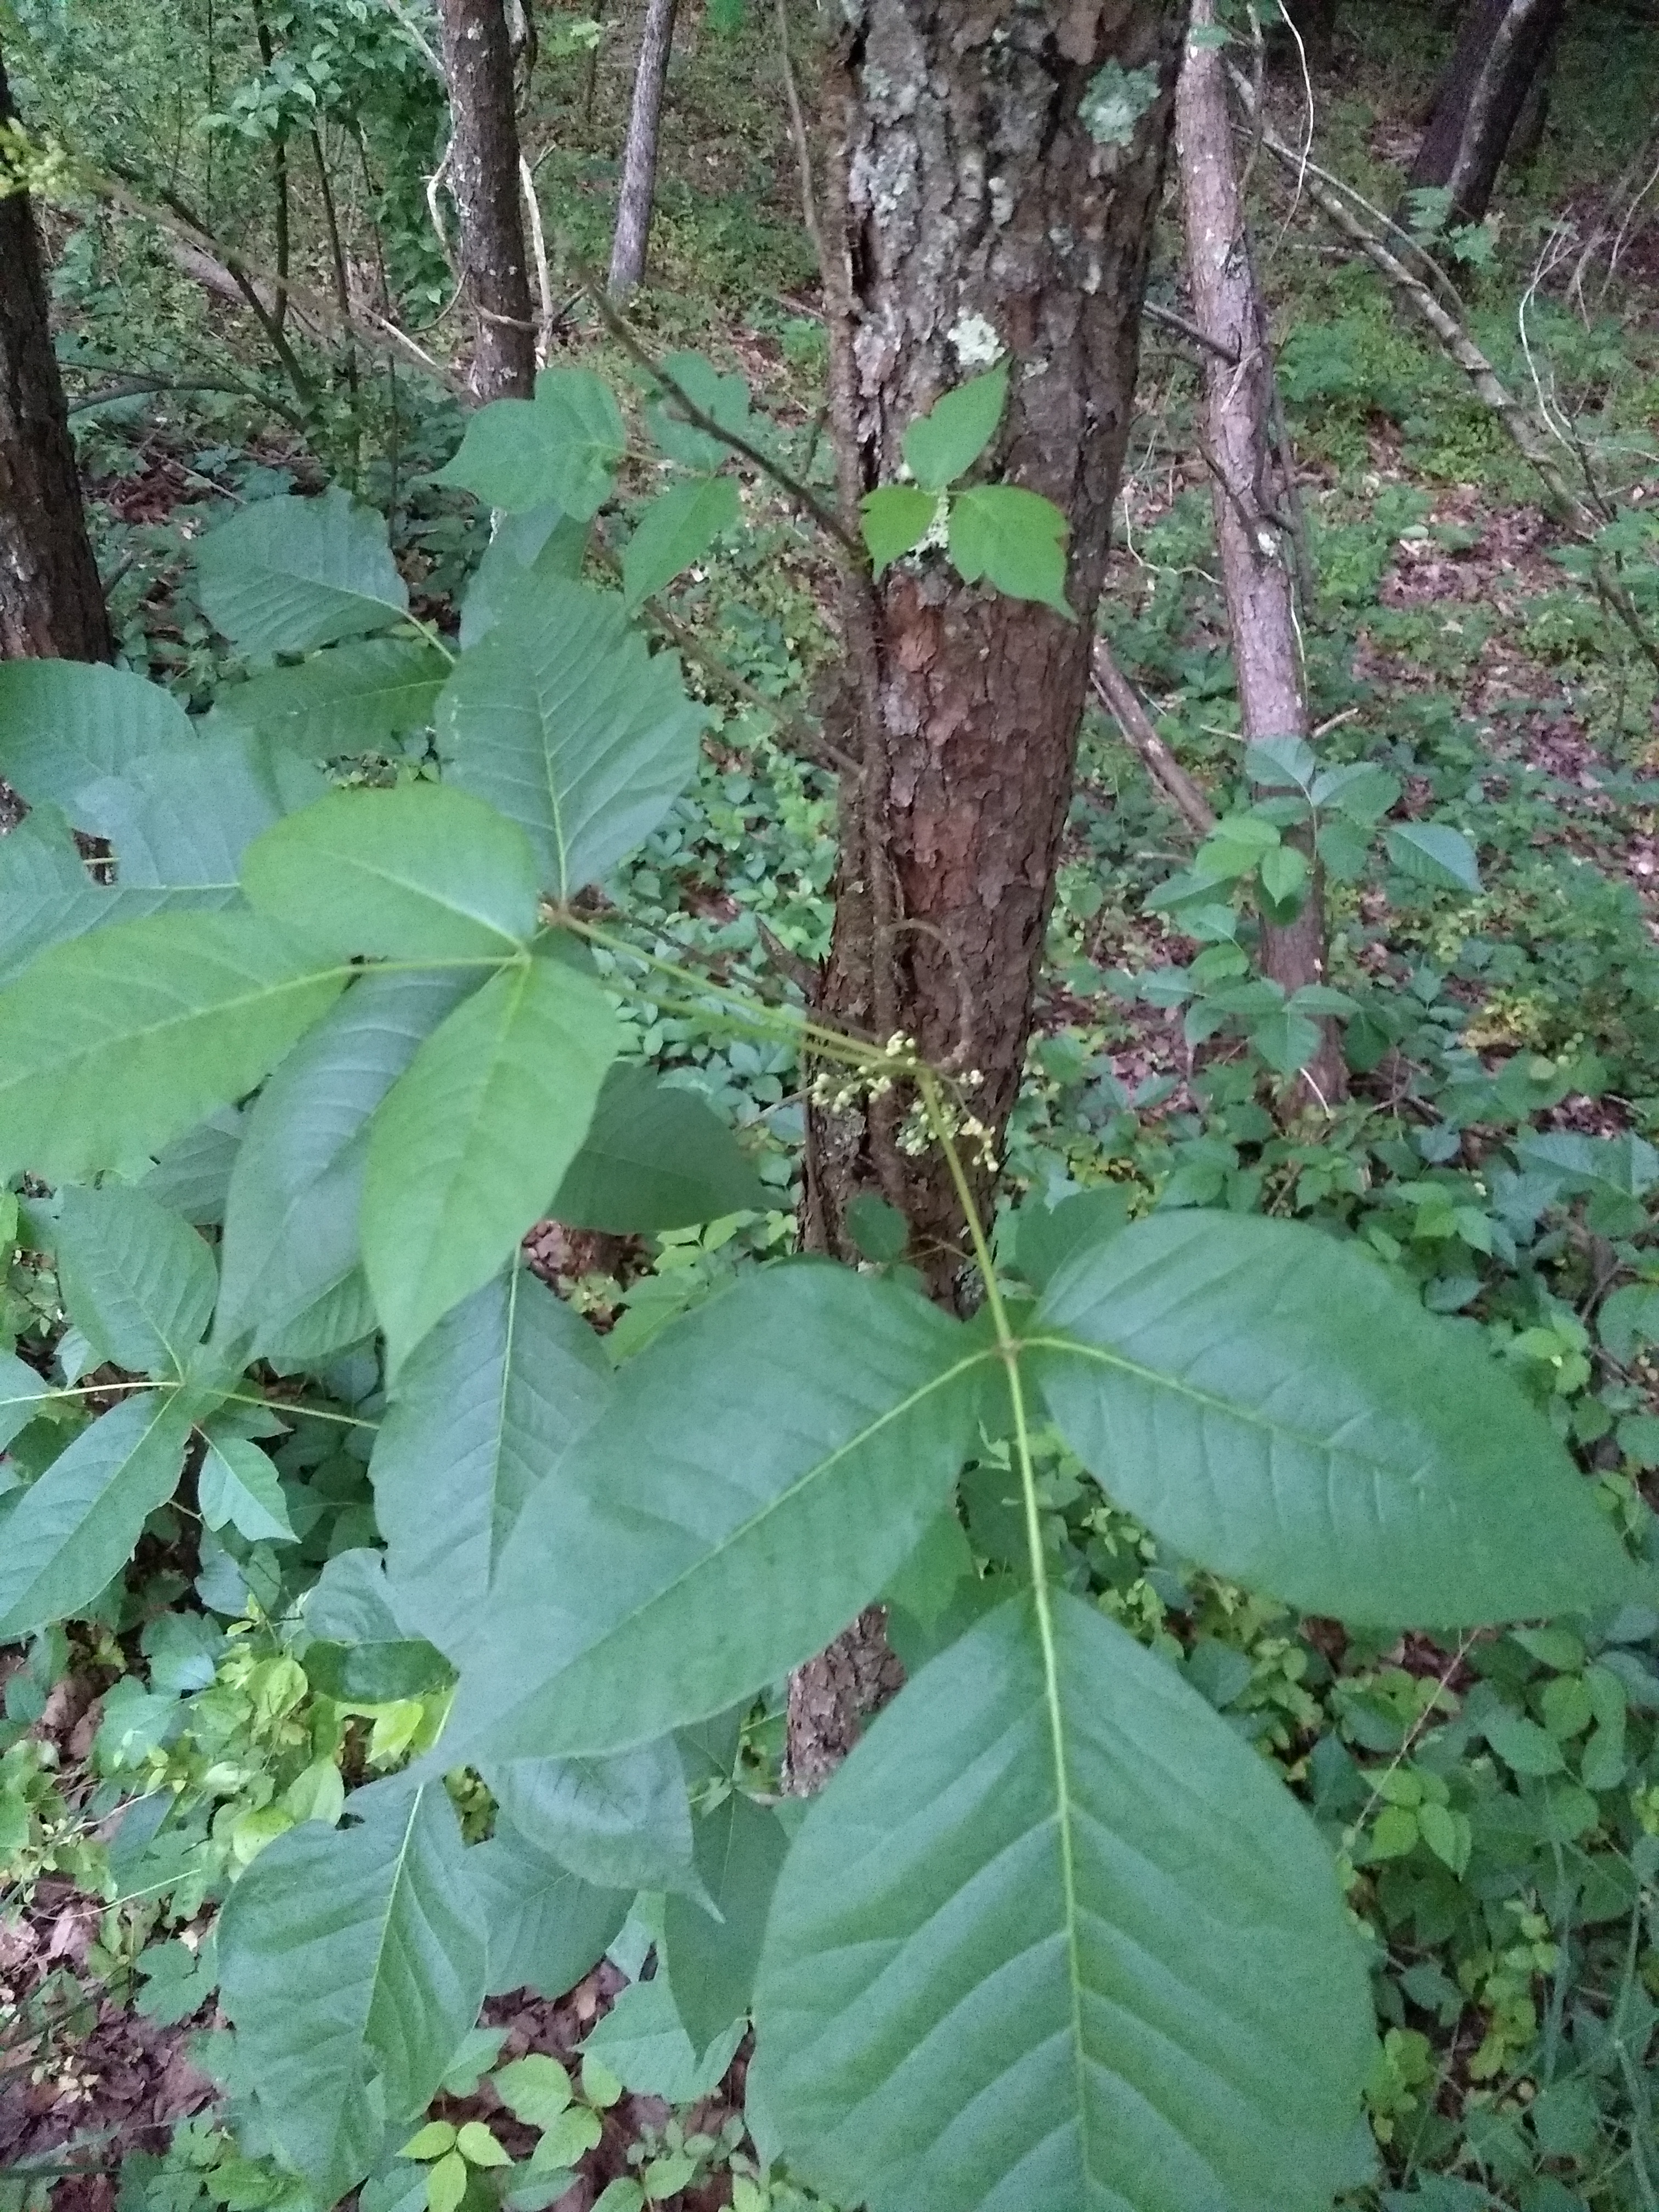 Poison Ivy in its native habitat. The small white flowers will become yellow white berries in the fall. (credit: Seth Nagy)